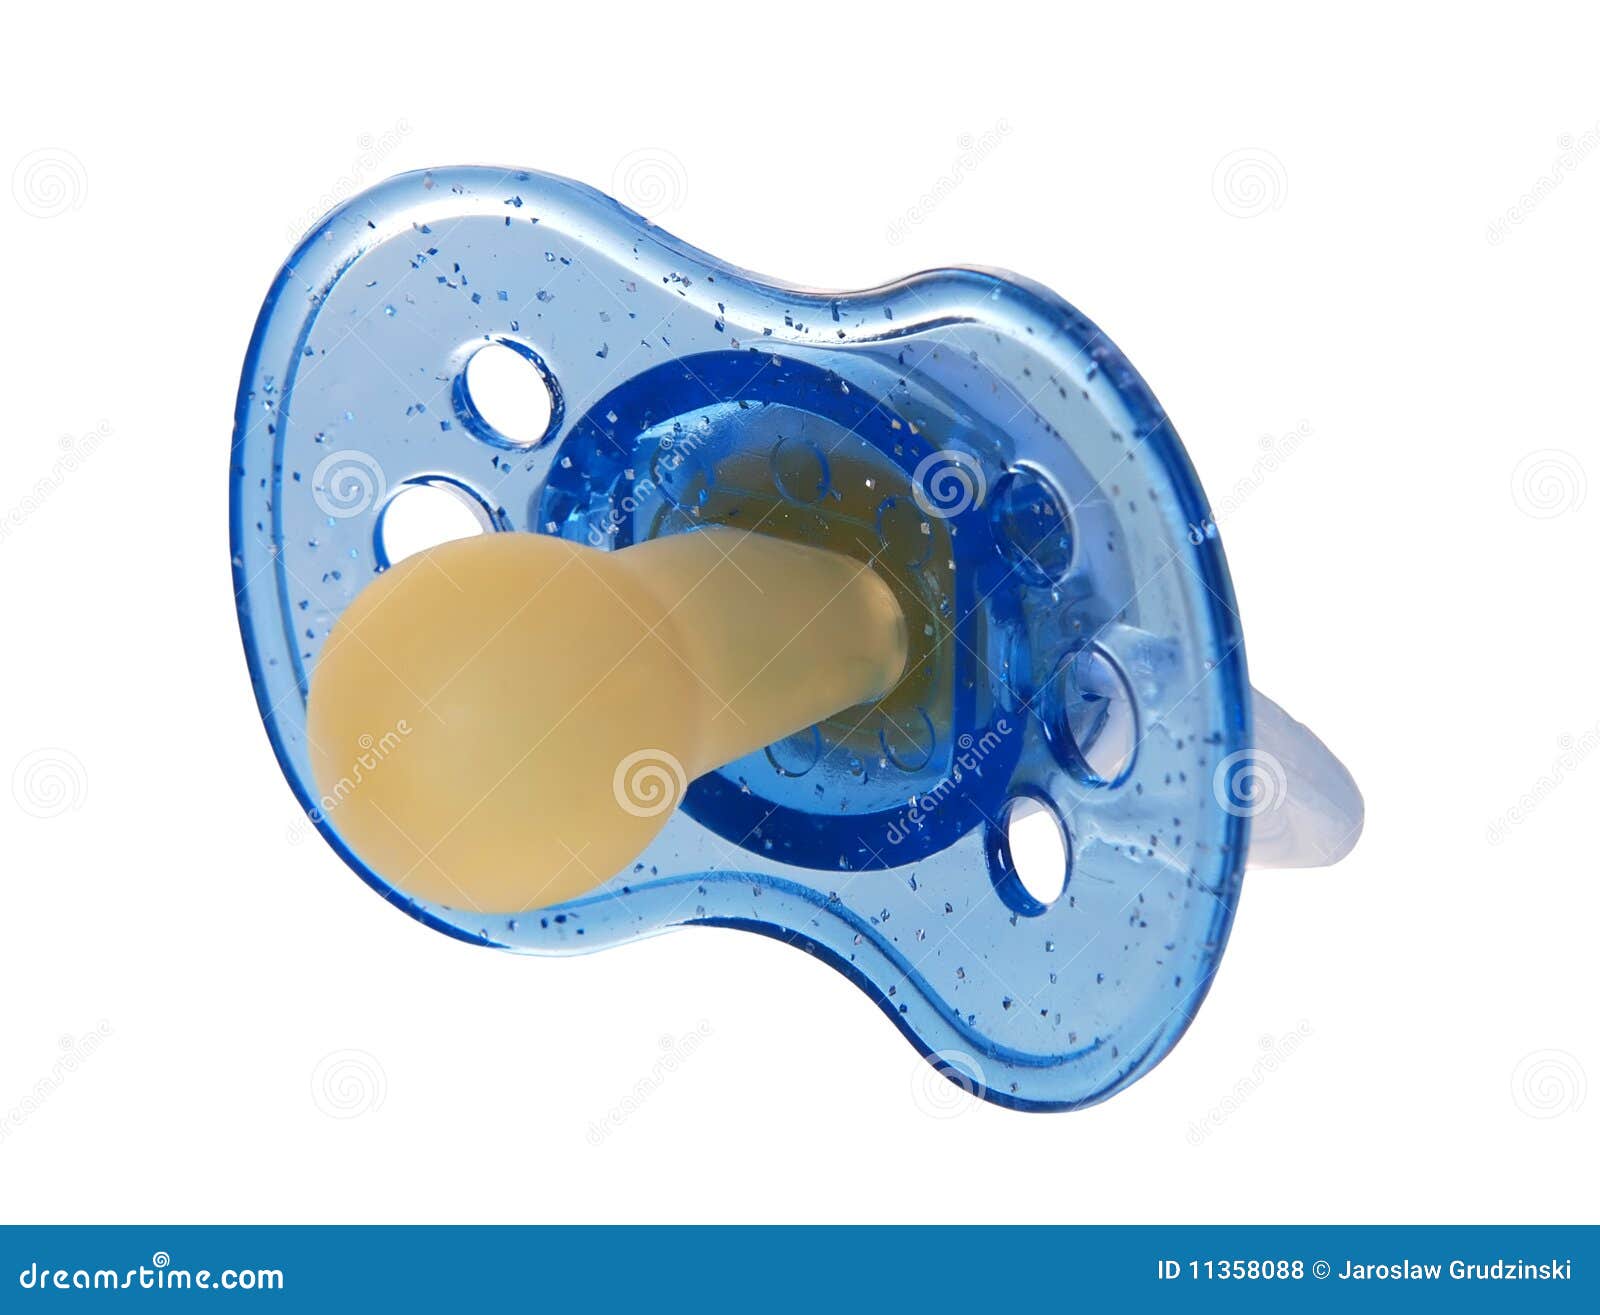 Rubber dummy stock photo. Image of objects, toddler, items - 11358088